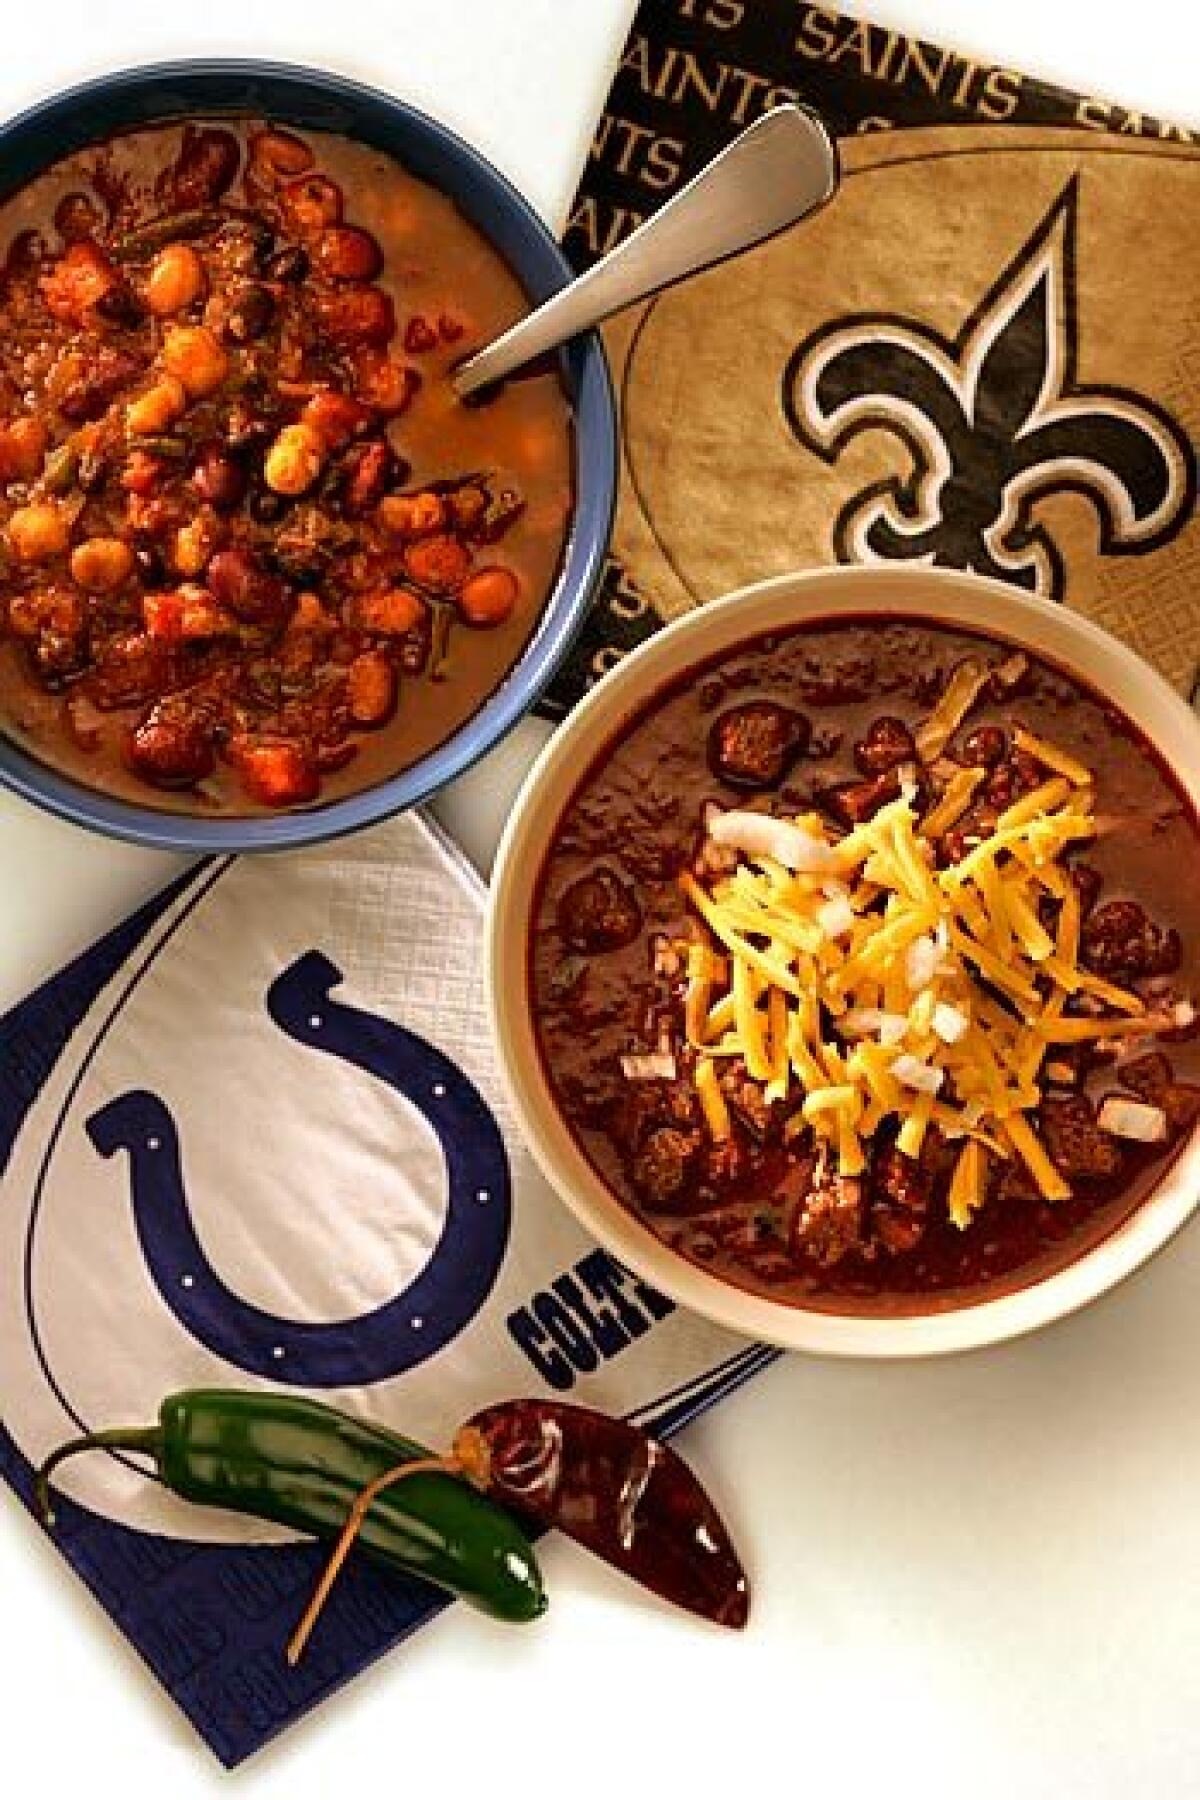 Chili is a wonderfully simple, no-fuss dish.